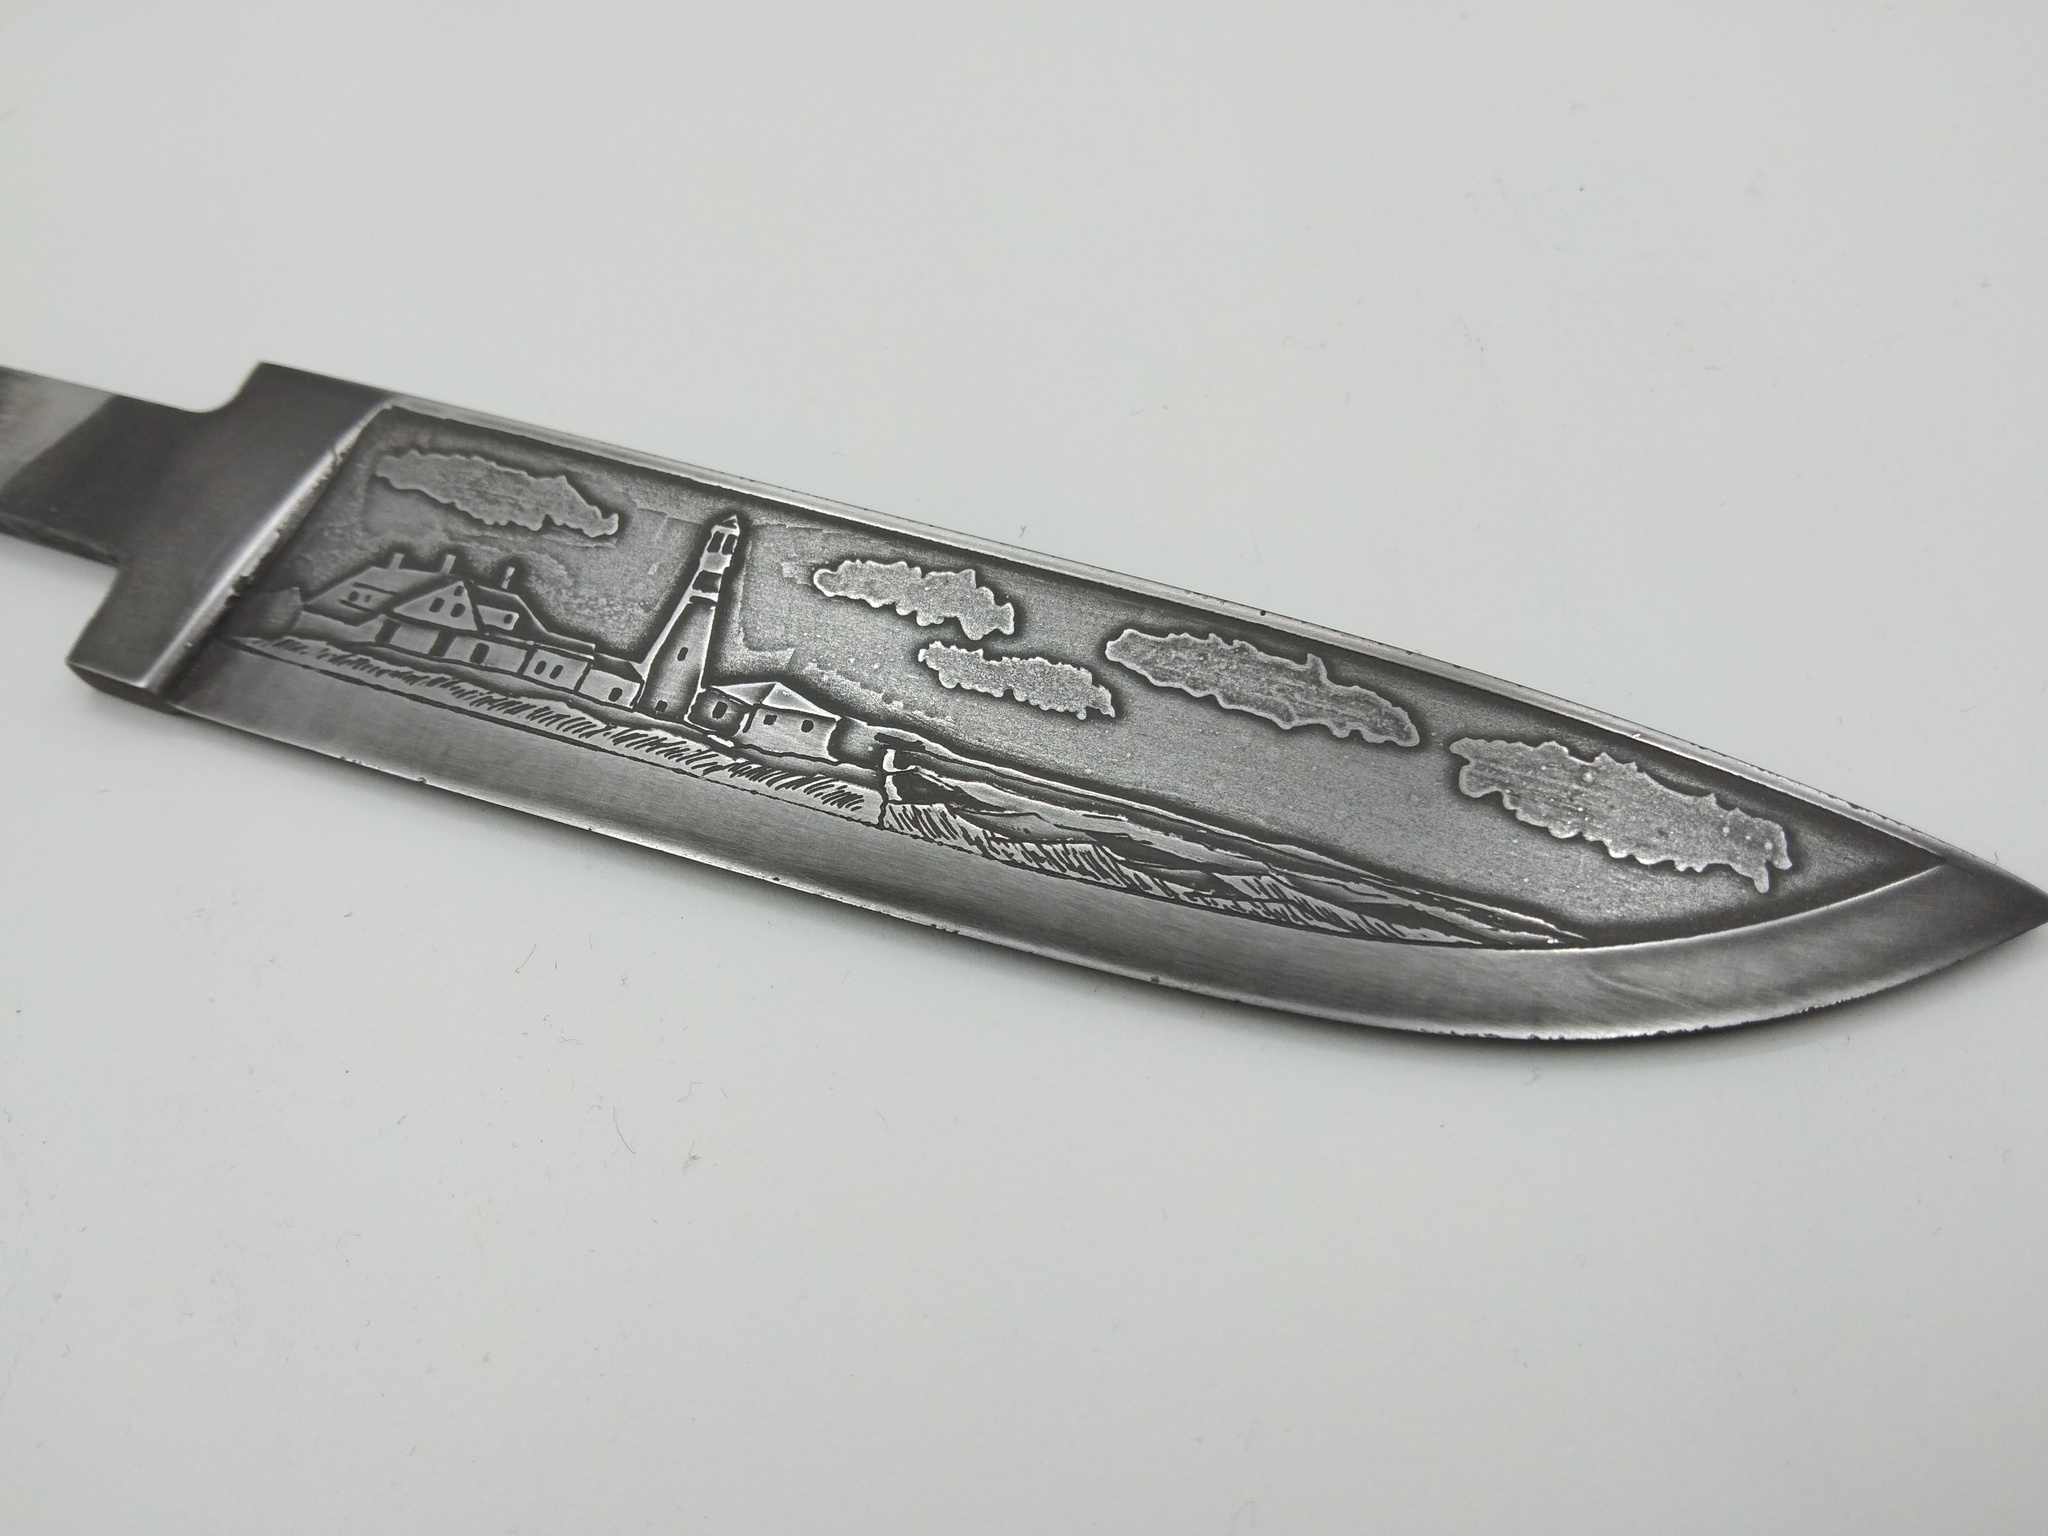 Four-layer etching of the blade. lighthouse and nature - My, Needlework with process, Knife, Etching, Drawing, Crafts, Customization, Metalworking, Woodworking, Decor, Metal products, Video, Youtube, Longpost, Knife makers